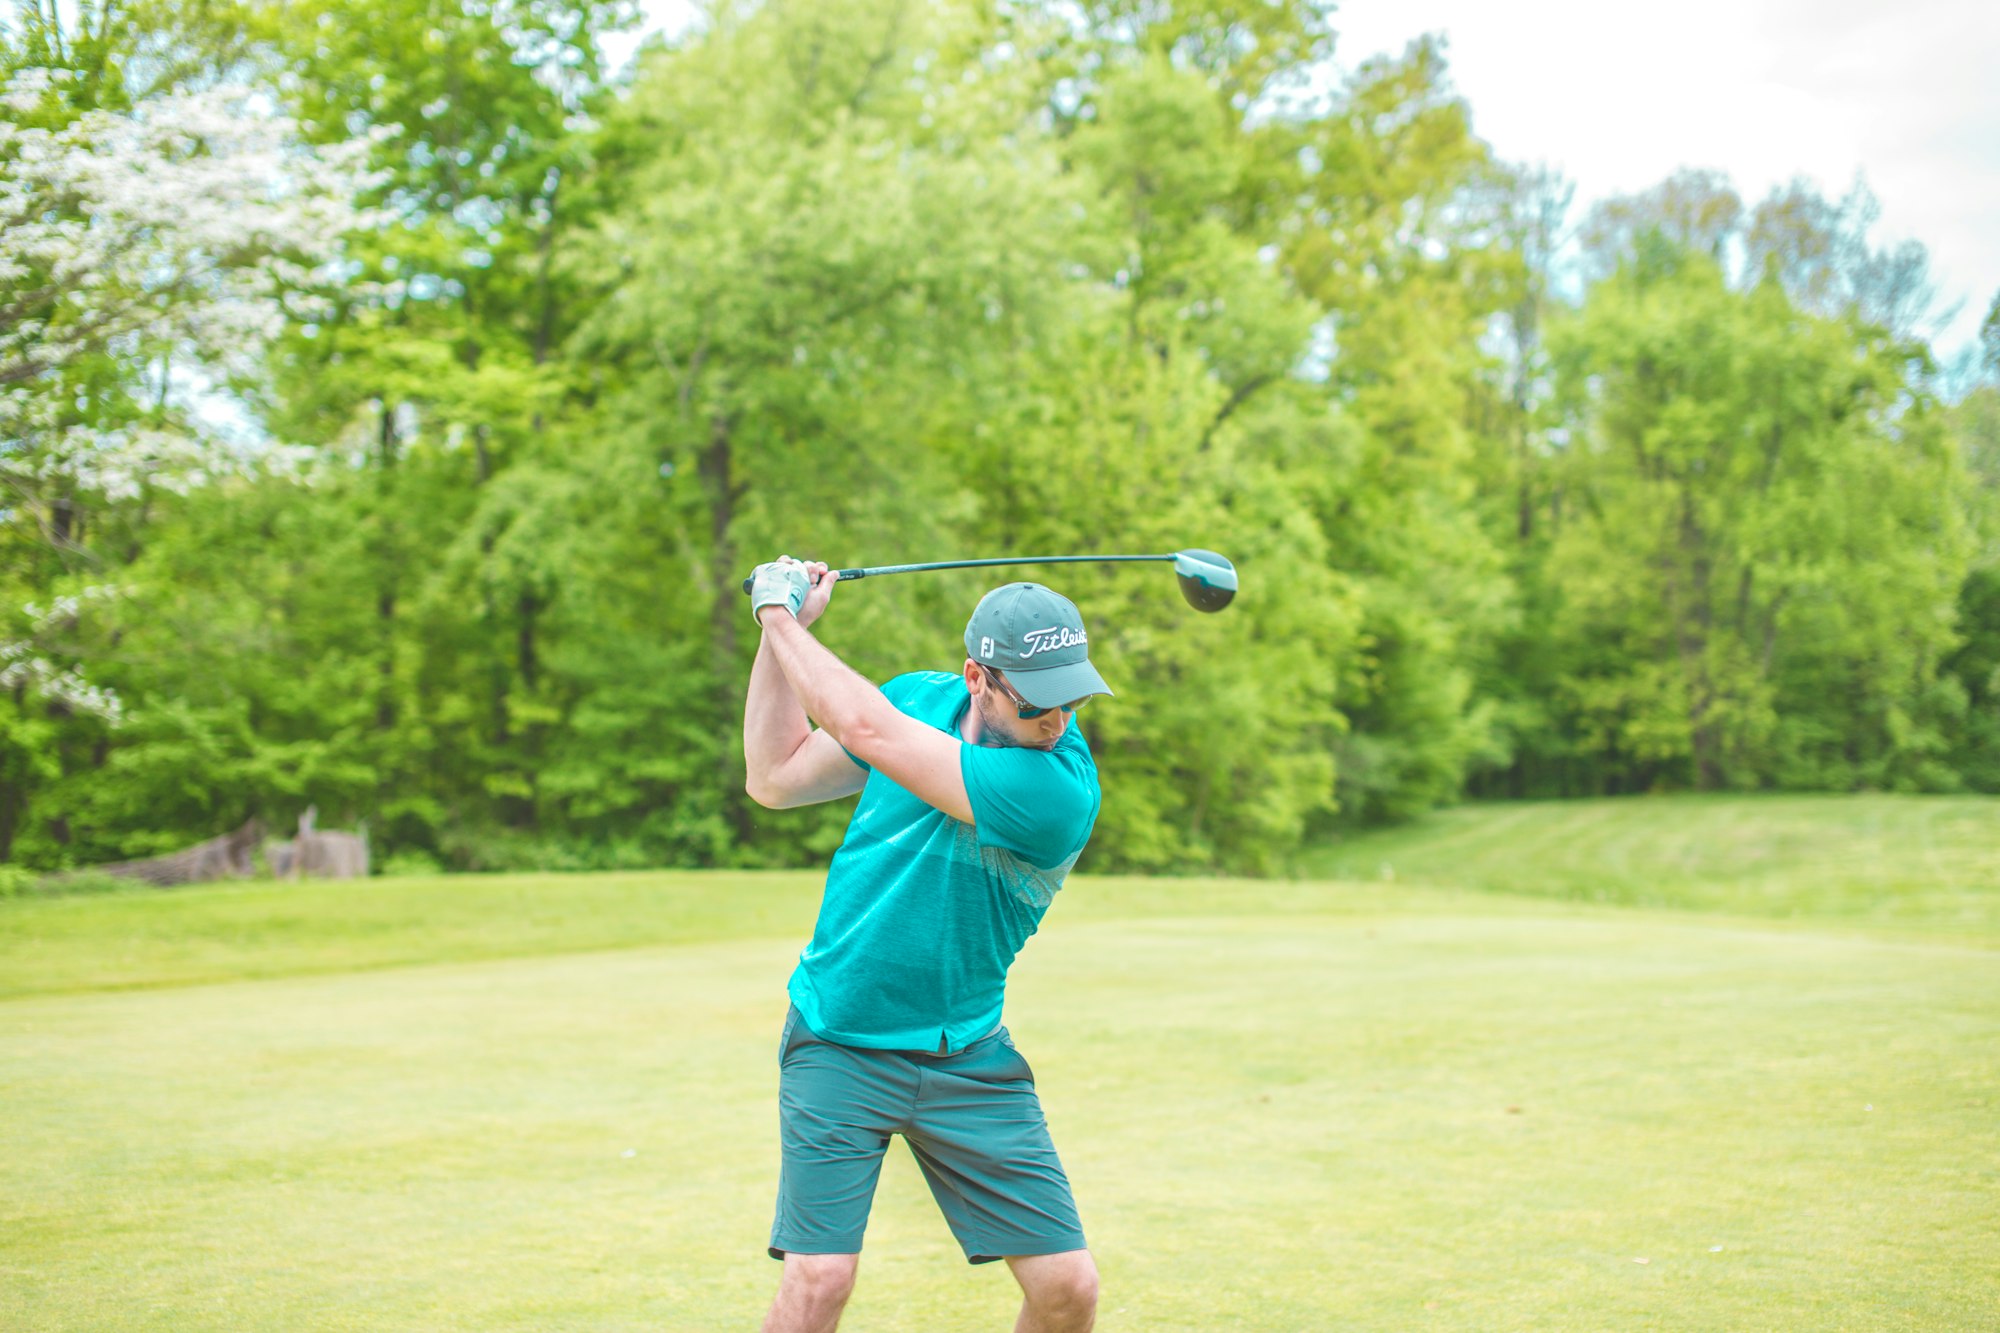 Should A Beginner Golfer Use A Driver? Find Out What Golf Clubs Should A Beginner Use!